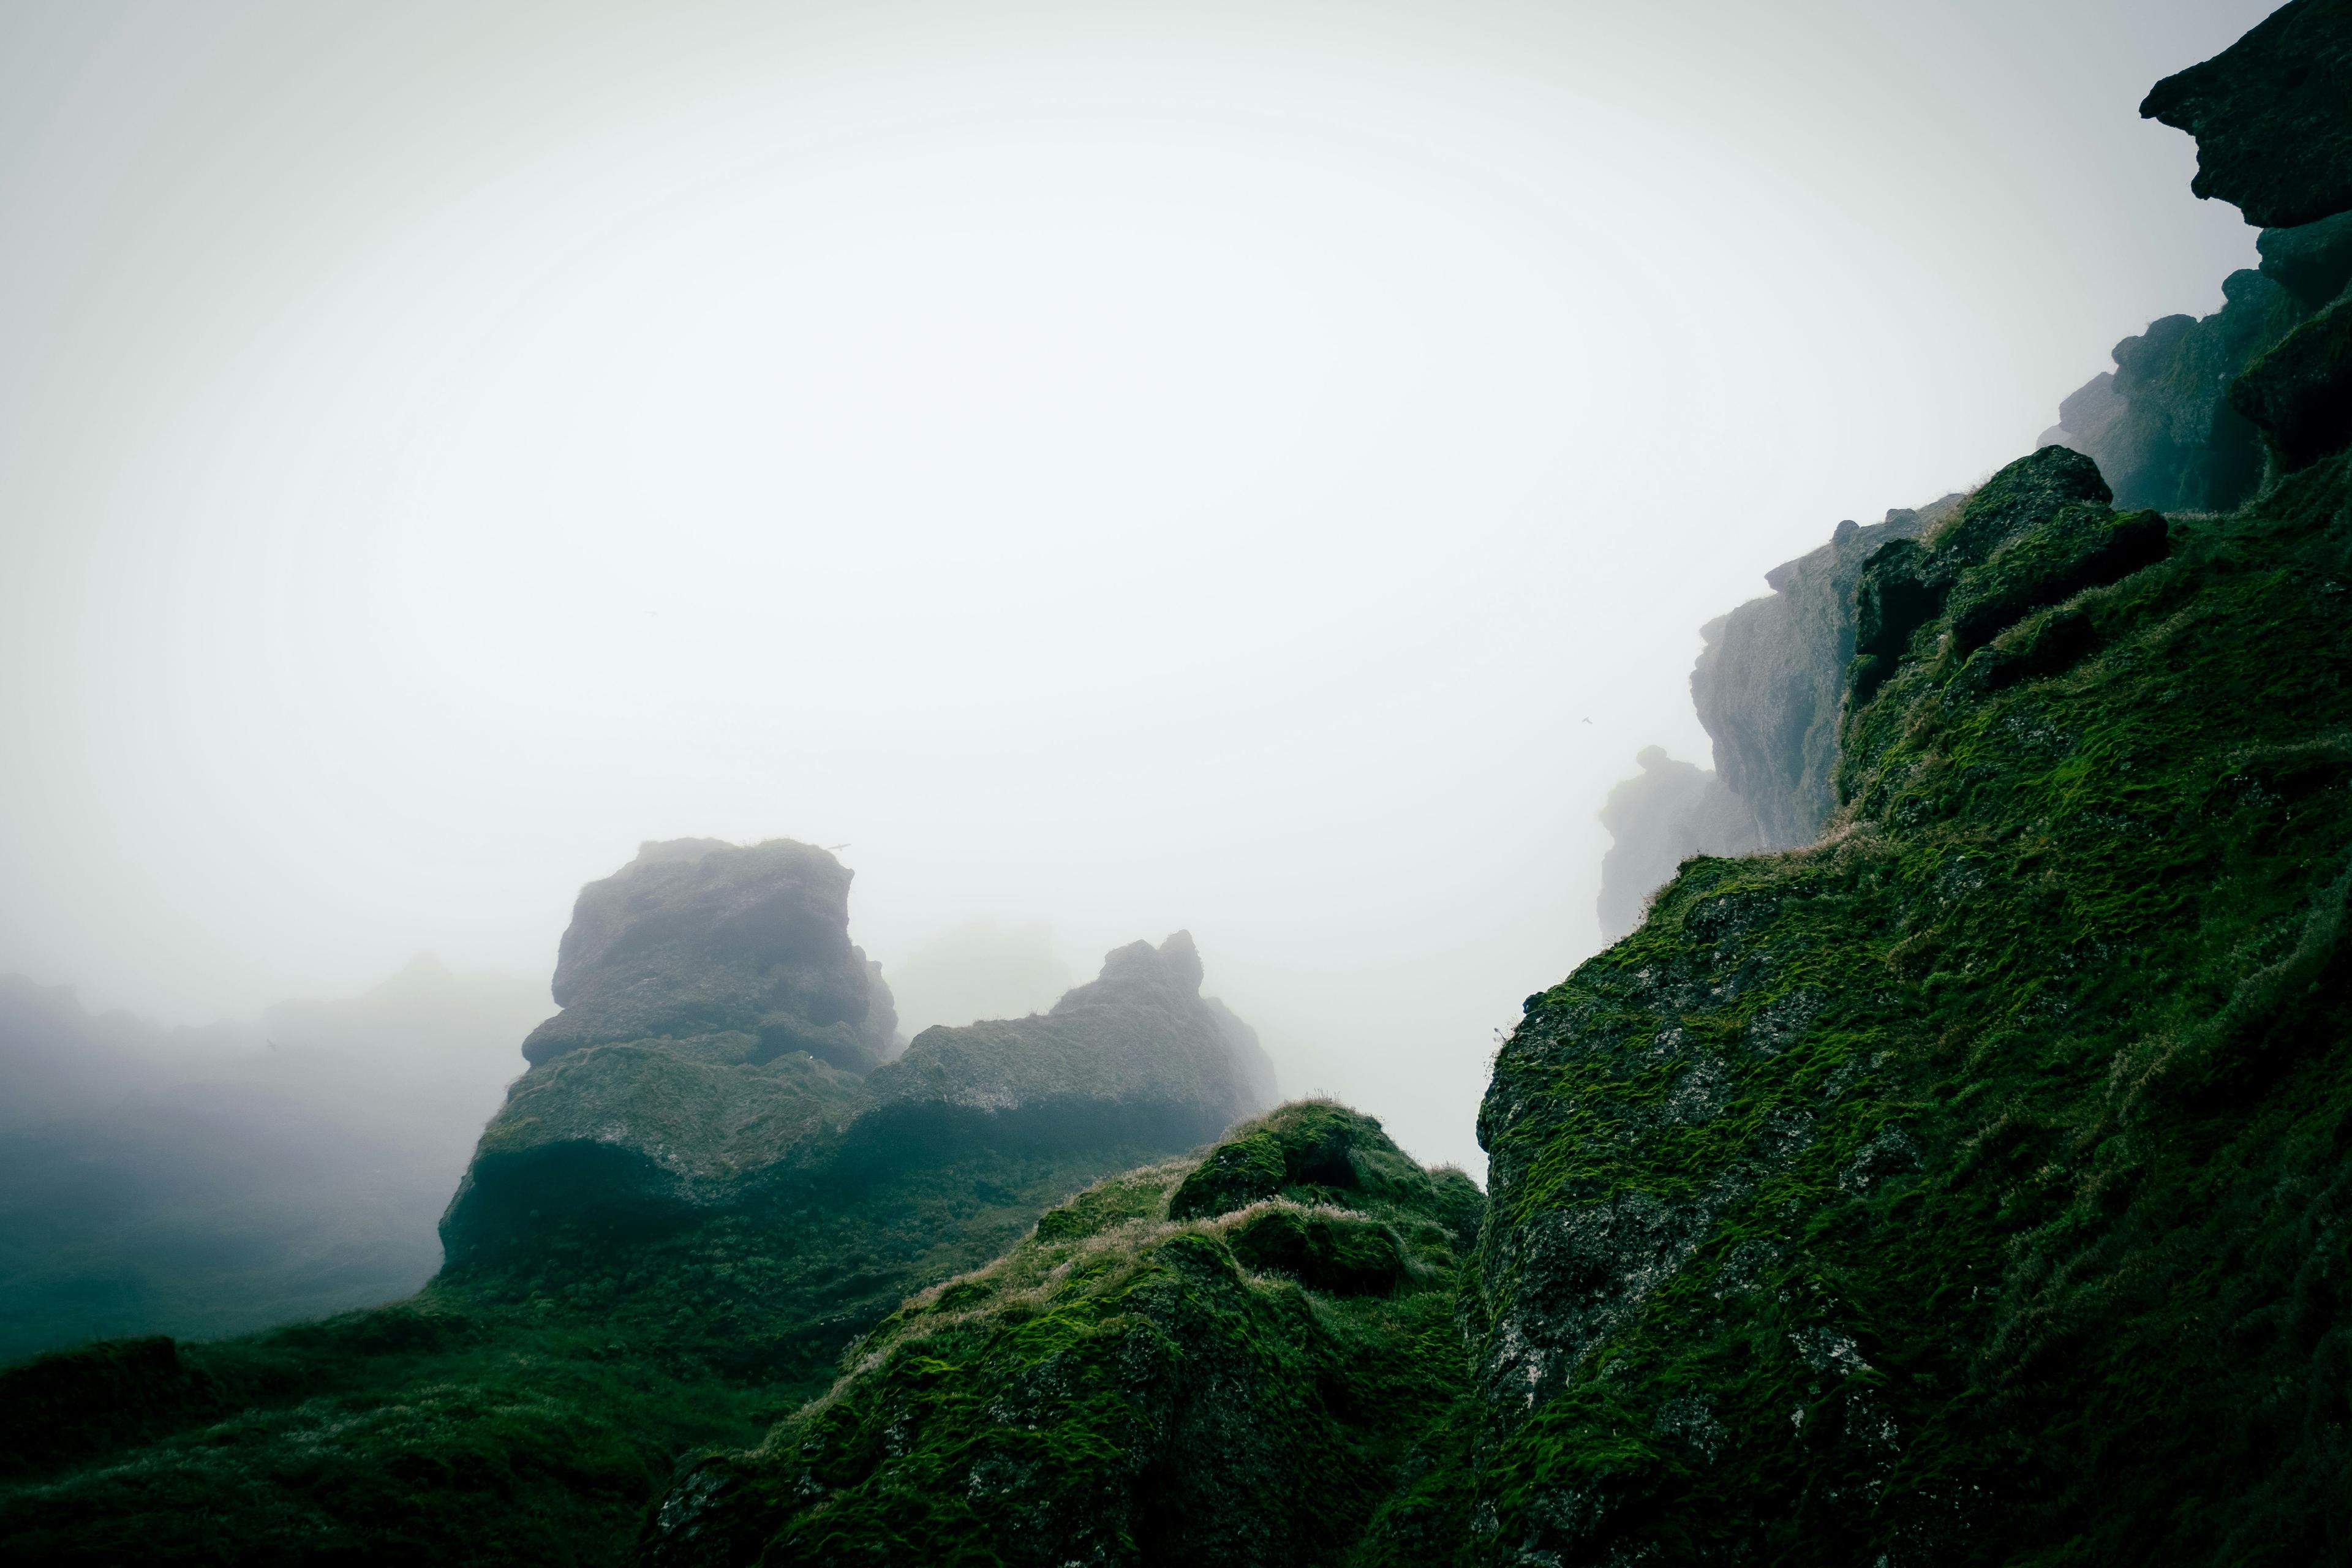 Eerie landscape of a misty canyon with silhouettes of rugged, moss-covered rocks, enveloped in a dense, atmospheric fog, creating a mysterious and ethereal setting